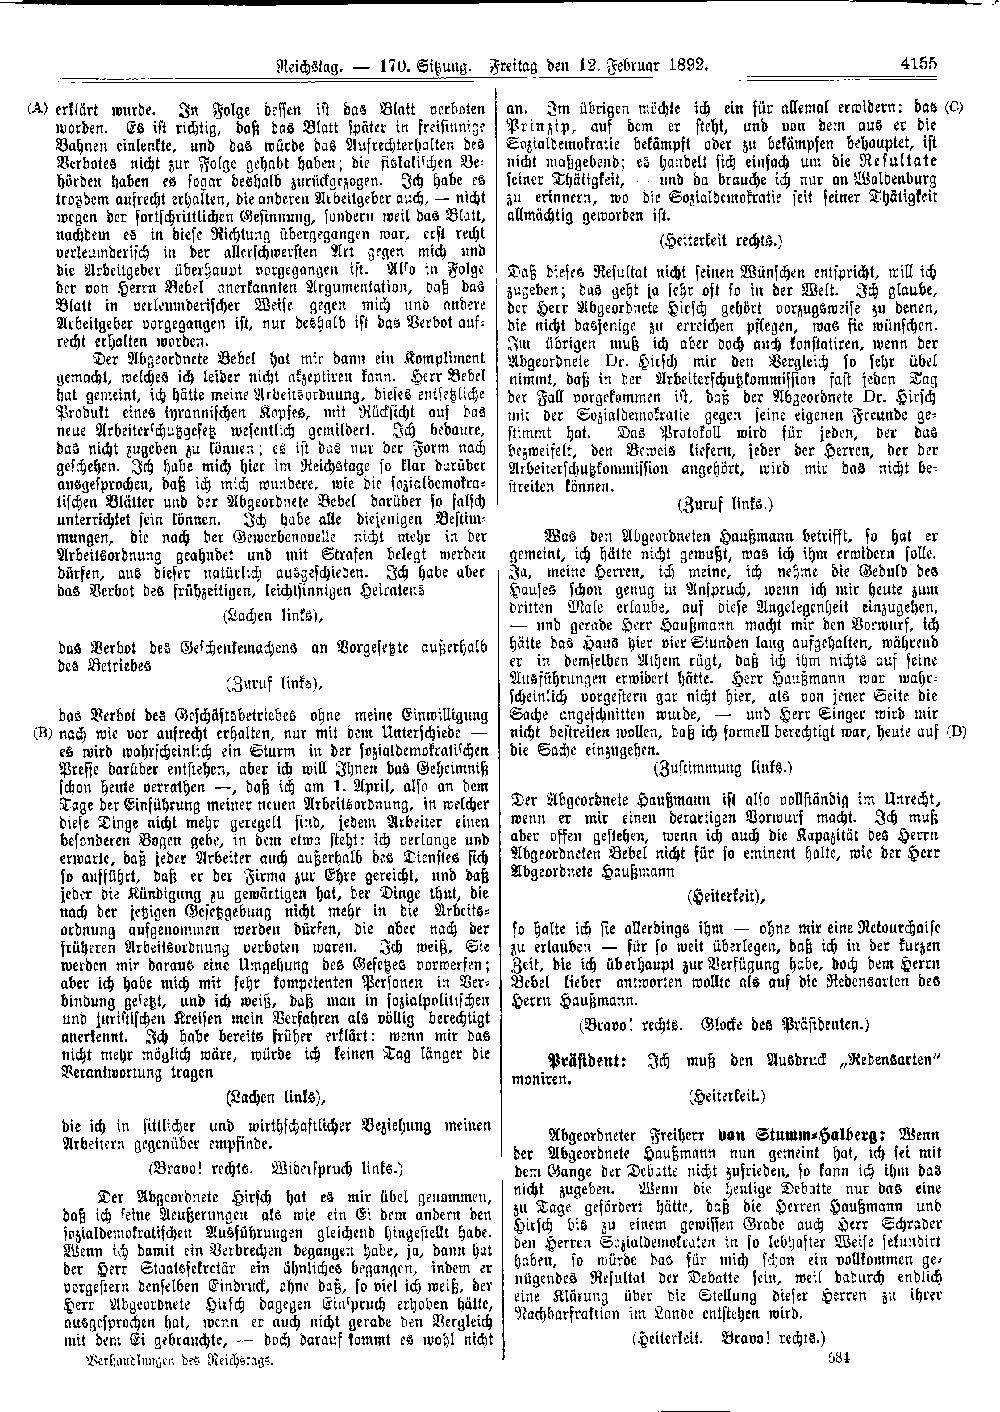 Scan of page 4155